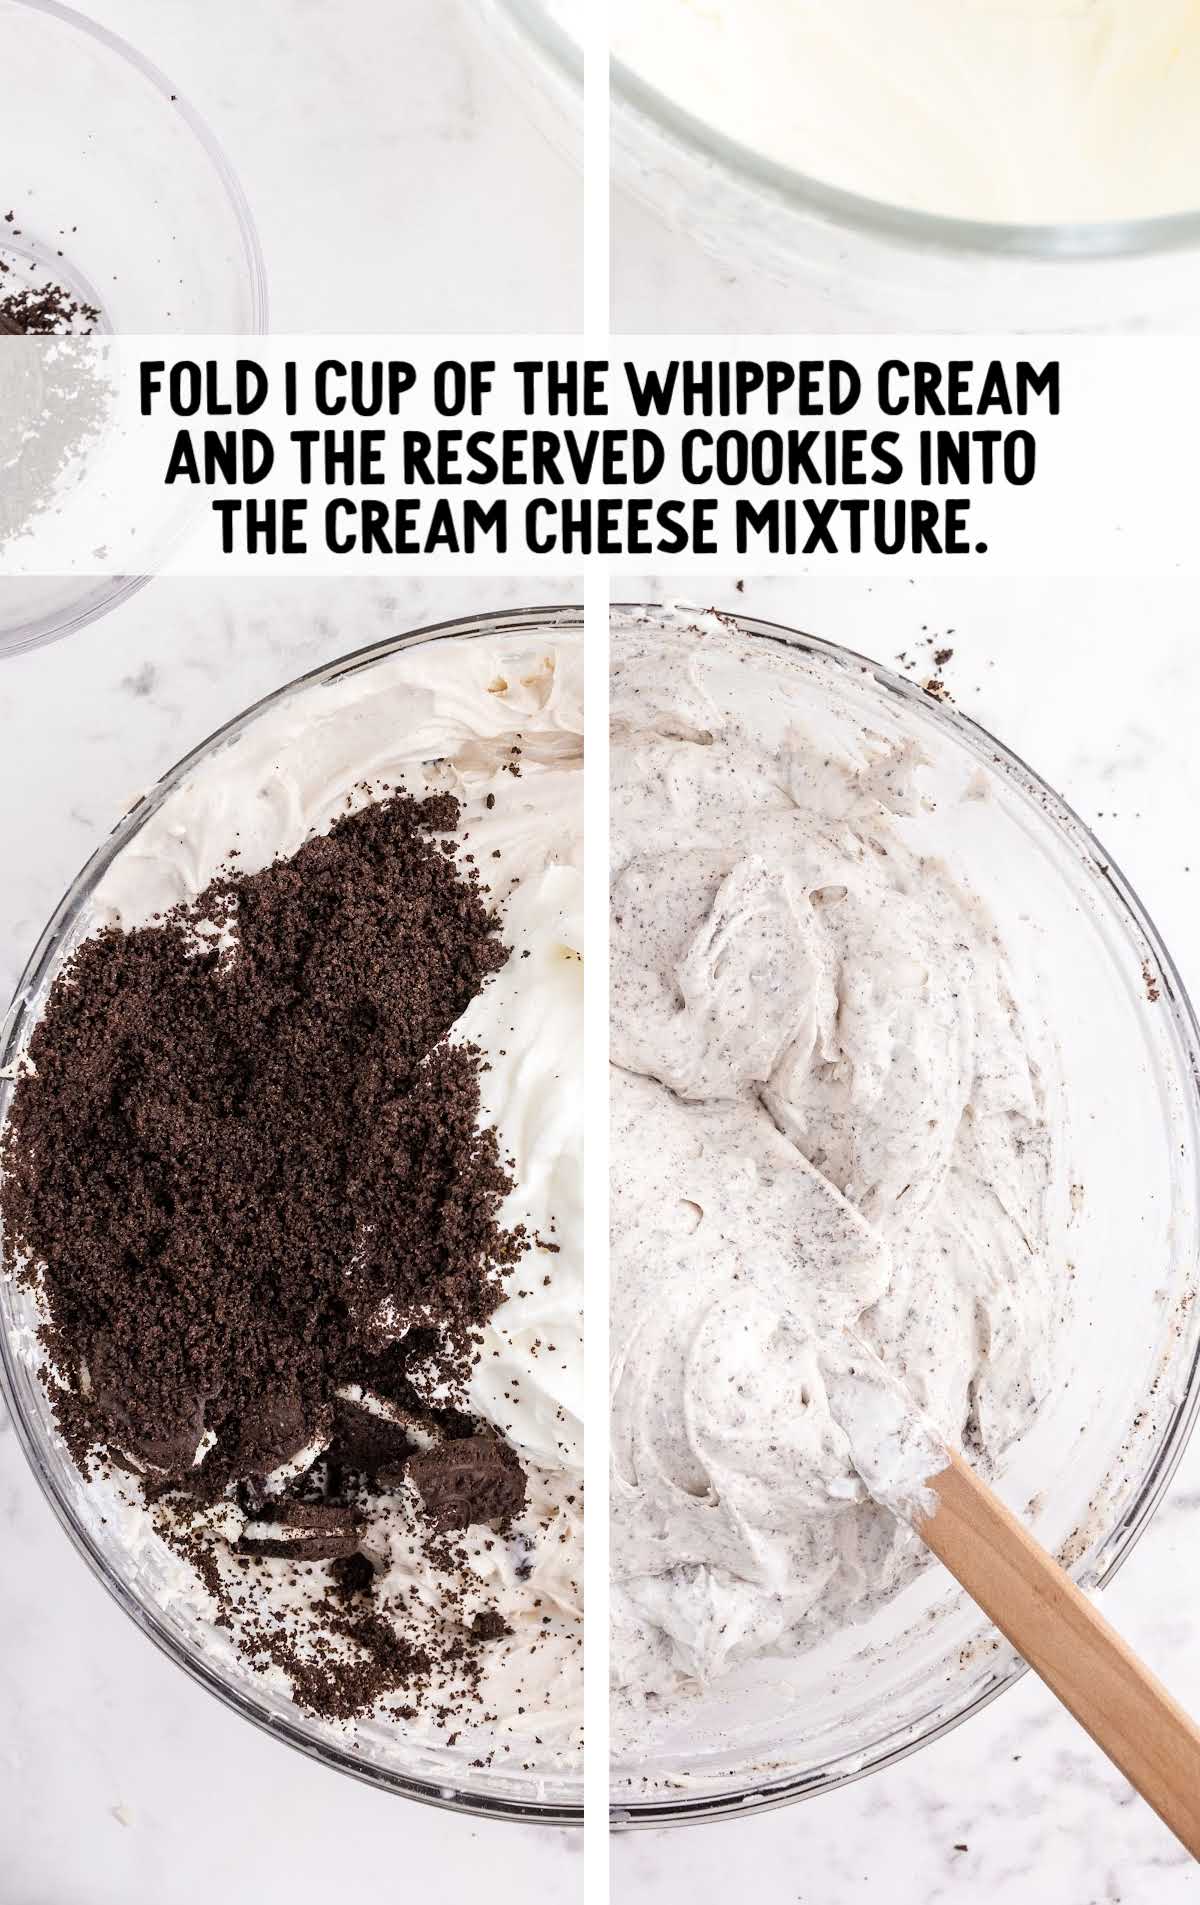 whipped cream and cookies folded into the cream cheese mixture